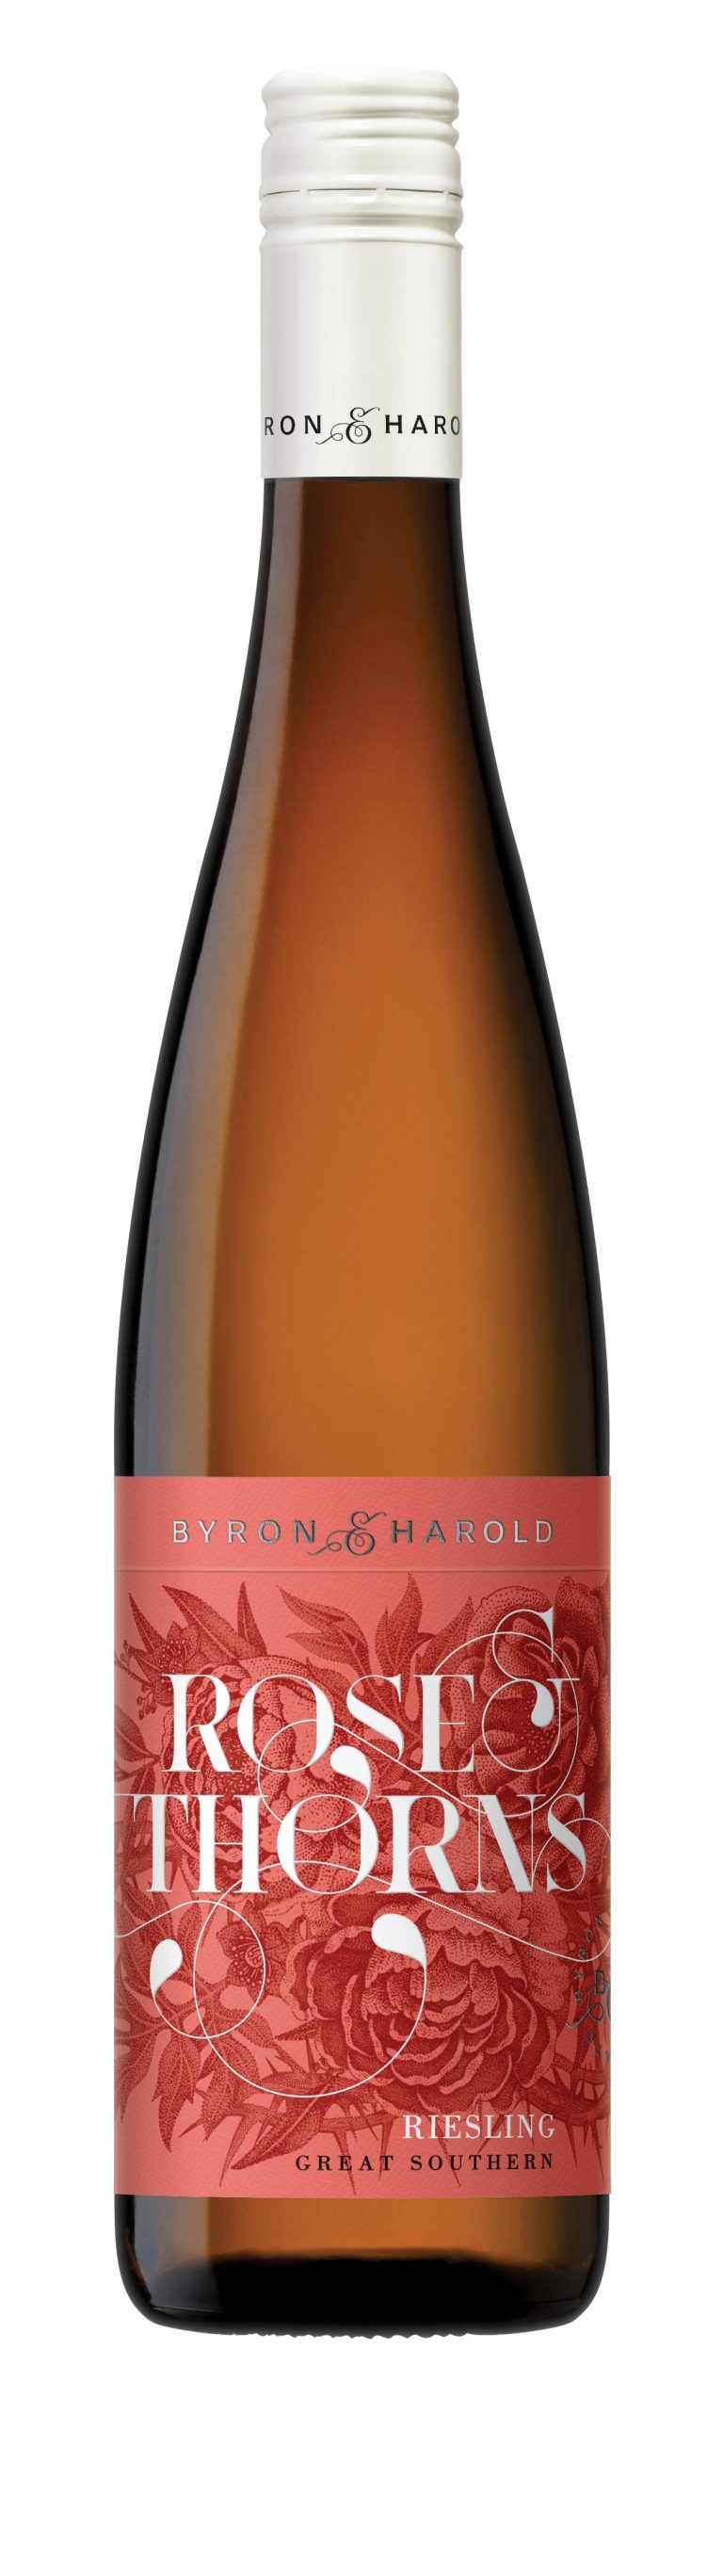 BH Rose Thorns Riesling